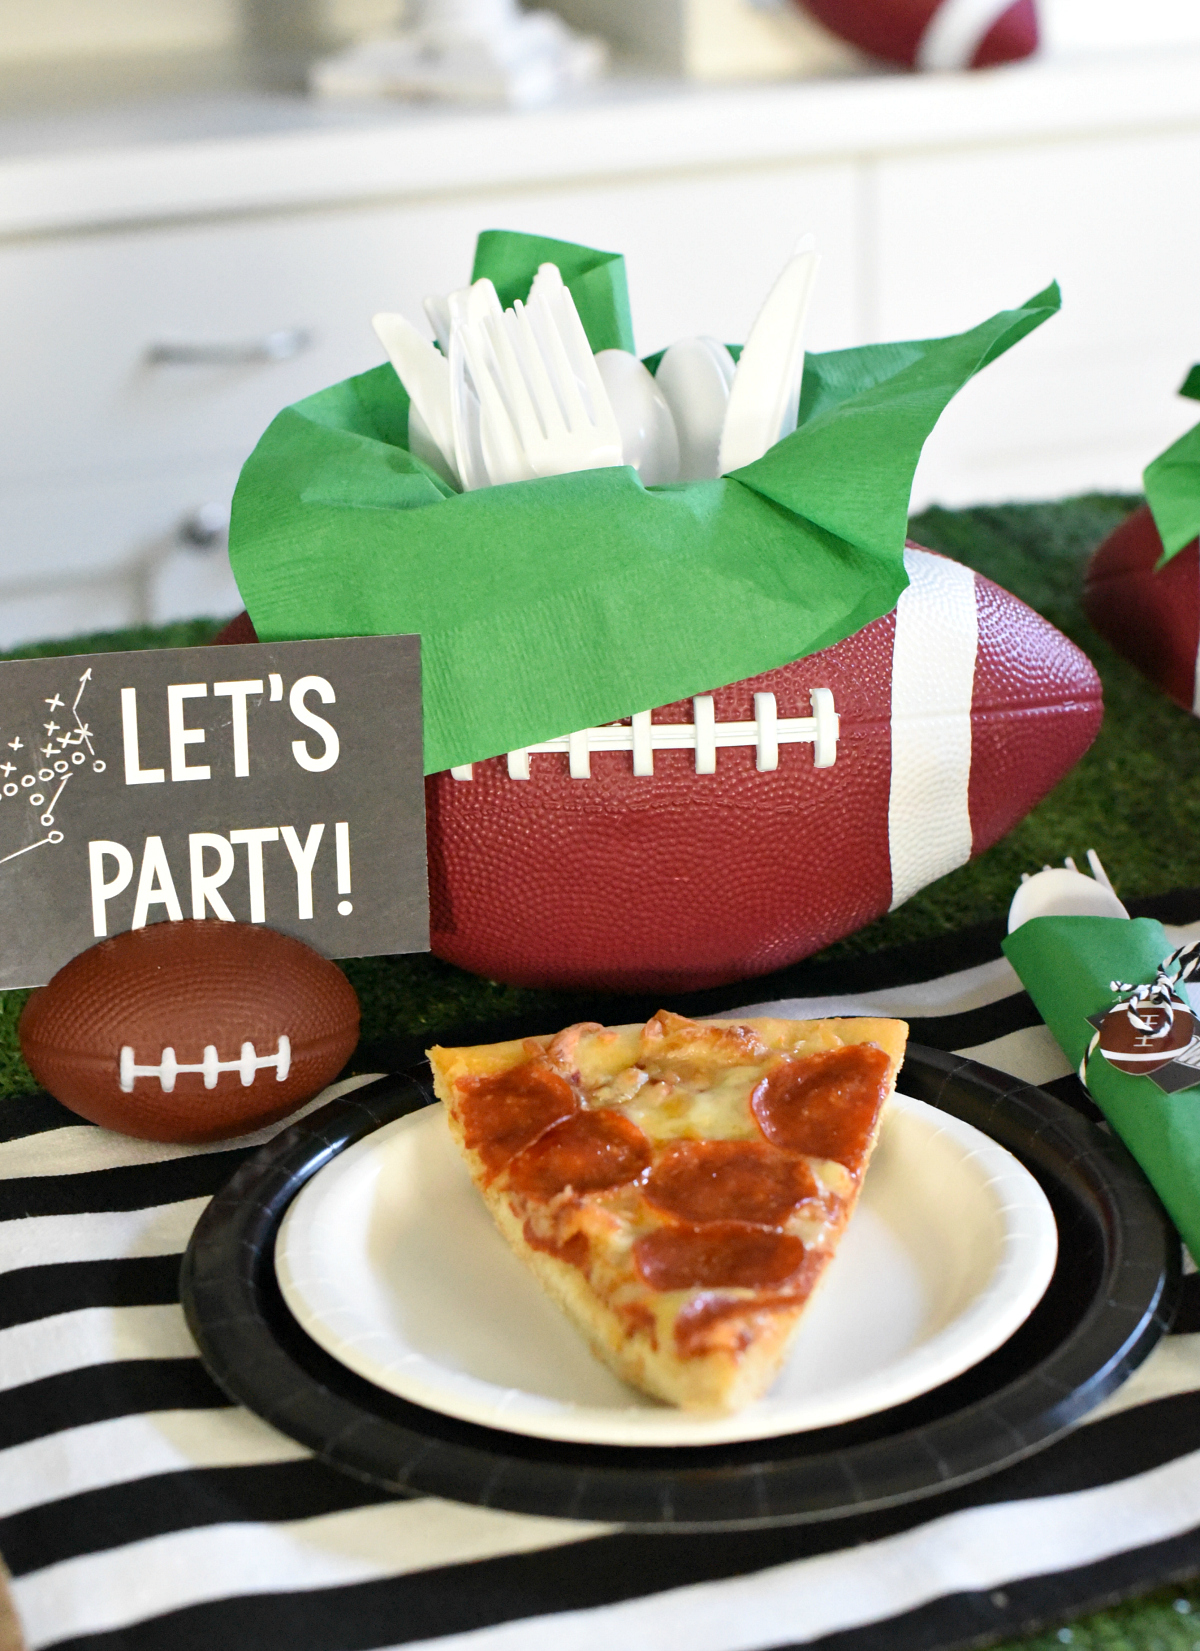 Tailgating Football Birthday Party Food Ideas